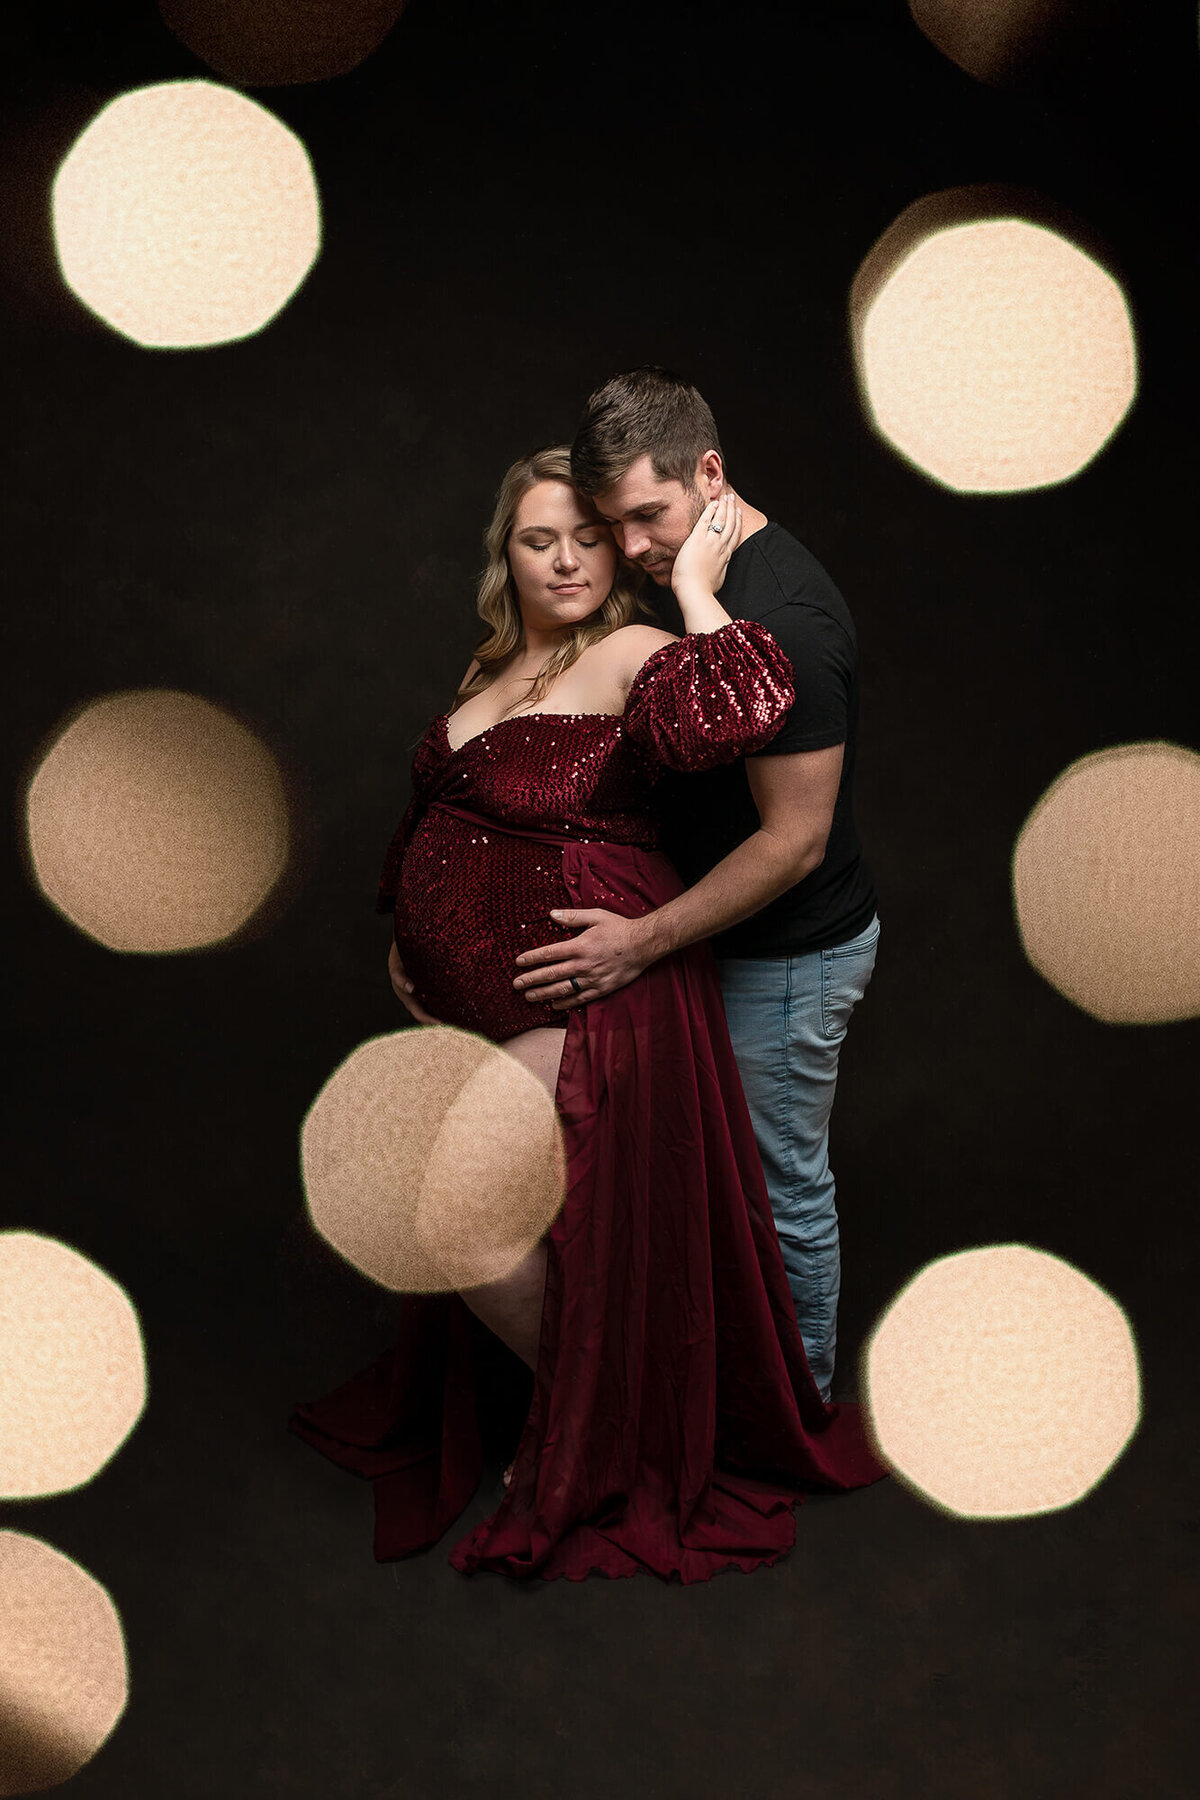 Beautiful bokeh lights framing this soon to be mom and dad.